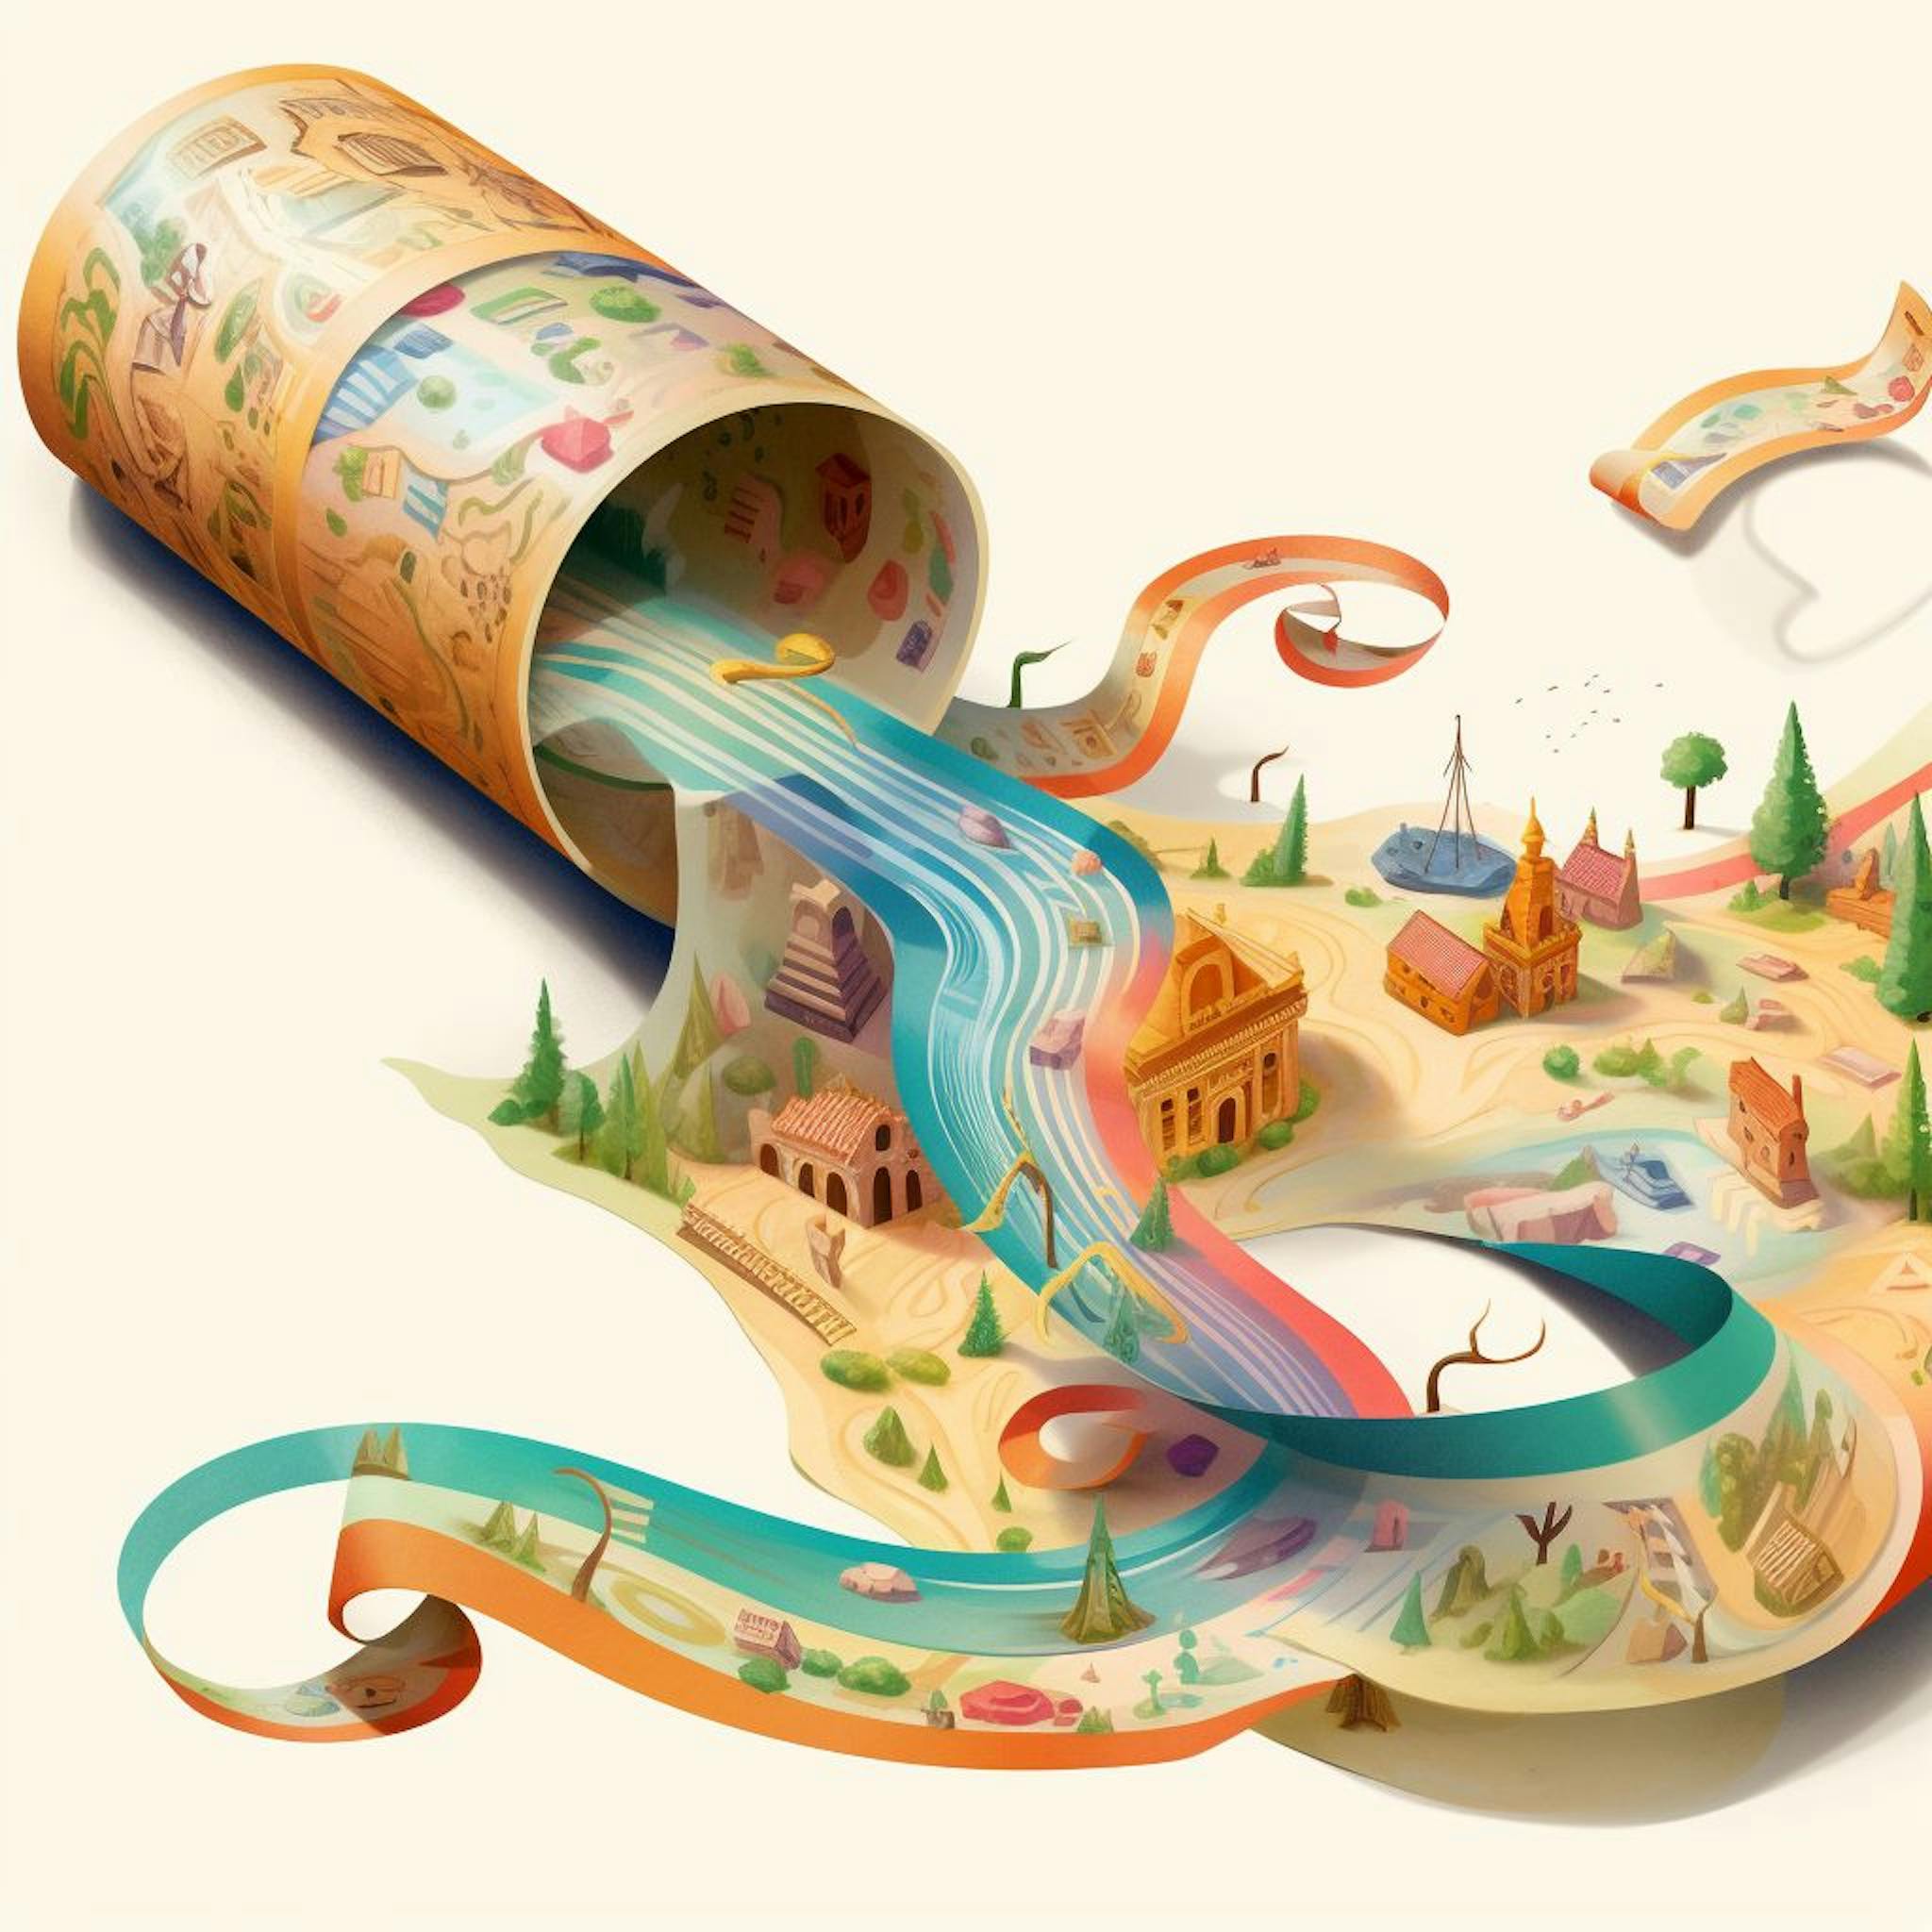 Midjourney v5: “painterly illustration of a long printed scroll of paper turning into a colorful ribbon that contains imaginative fantasy locations”